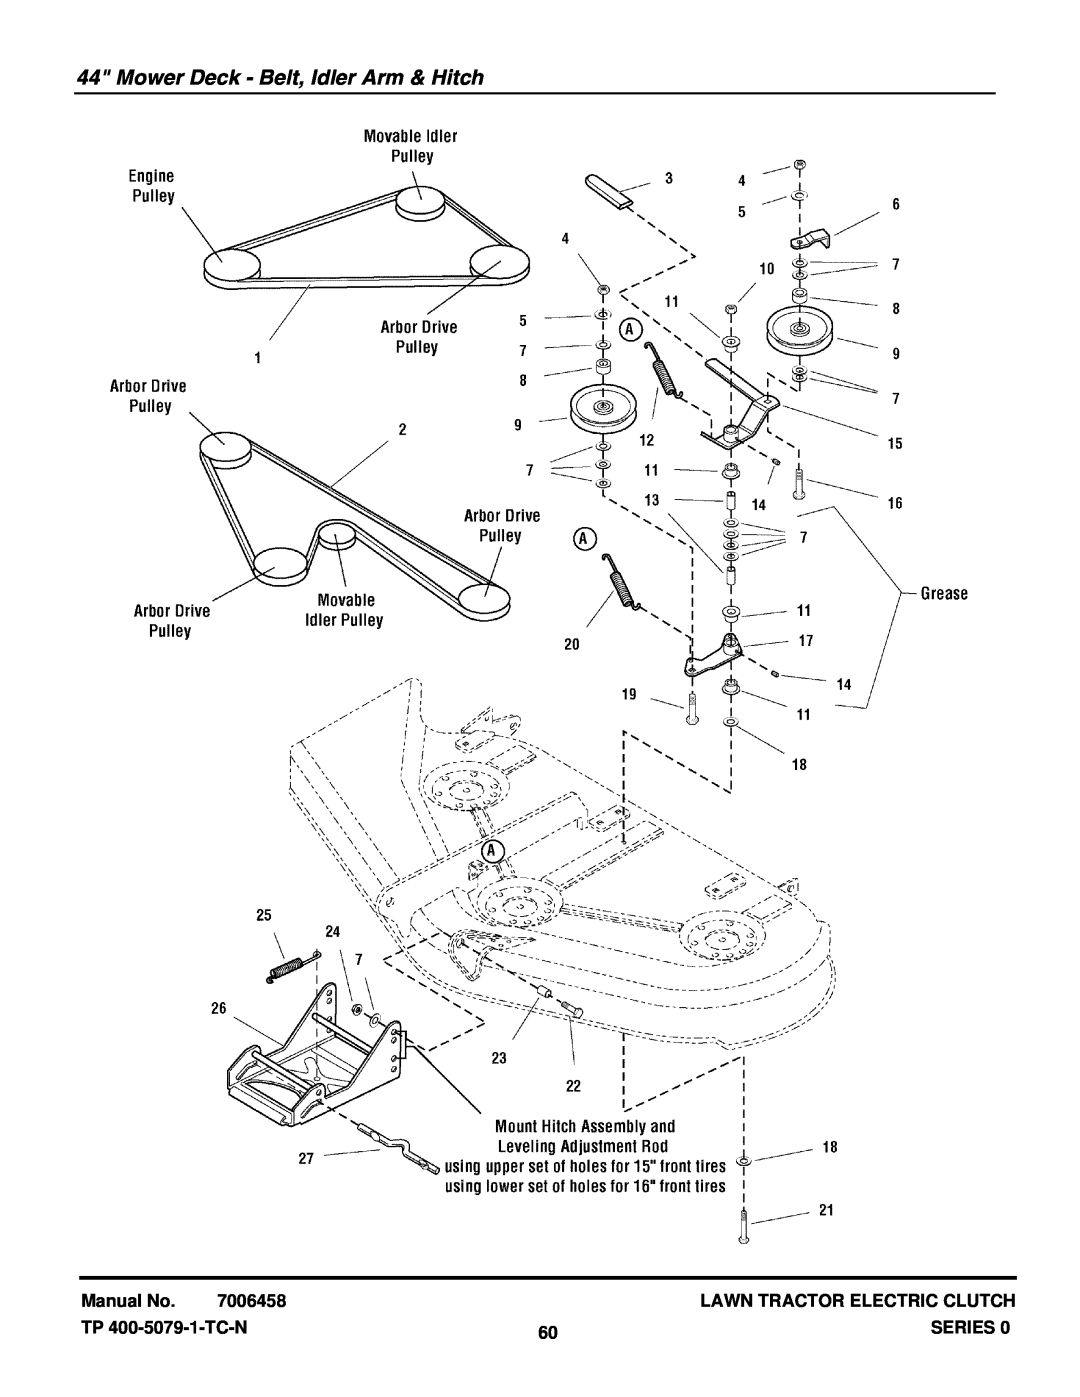 Snapper LT2040 (2690500) Mower Deck - Belt, Idler Arm & Hitch, Manual No, 7006458, Lawn Tractor Electric Clutch, Series 